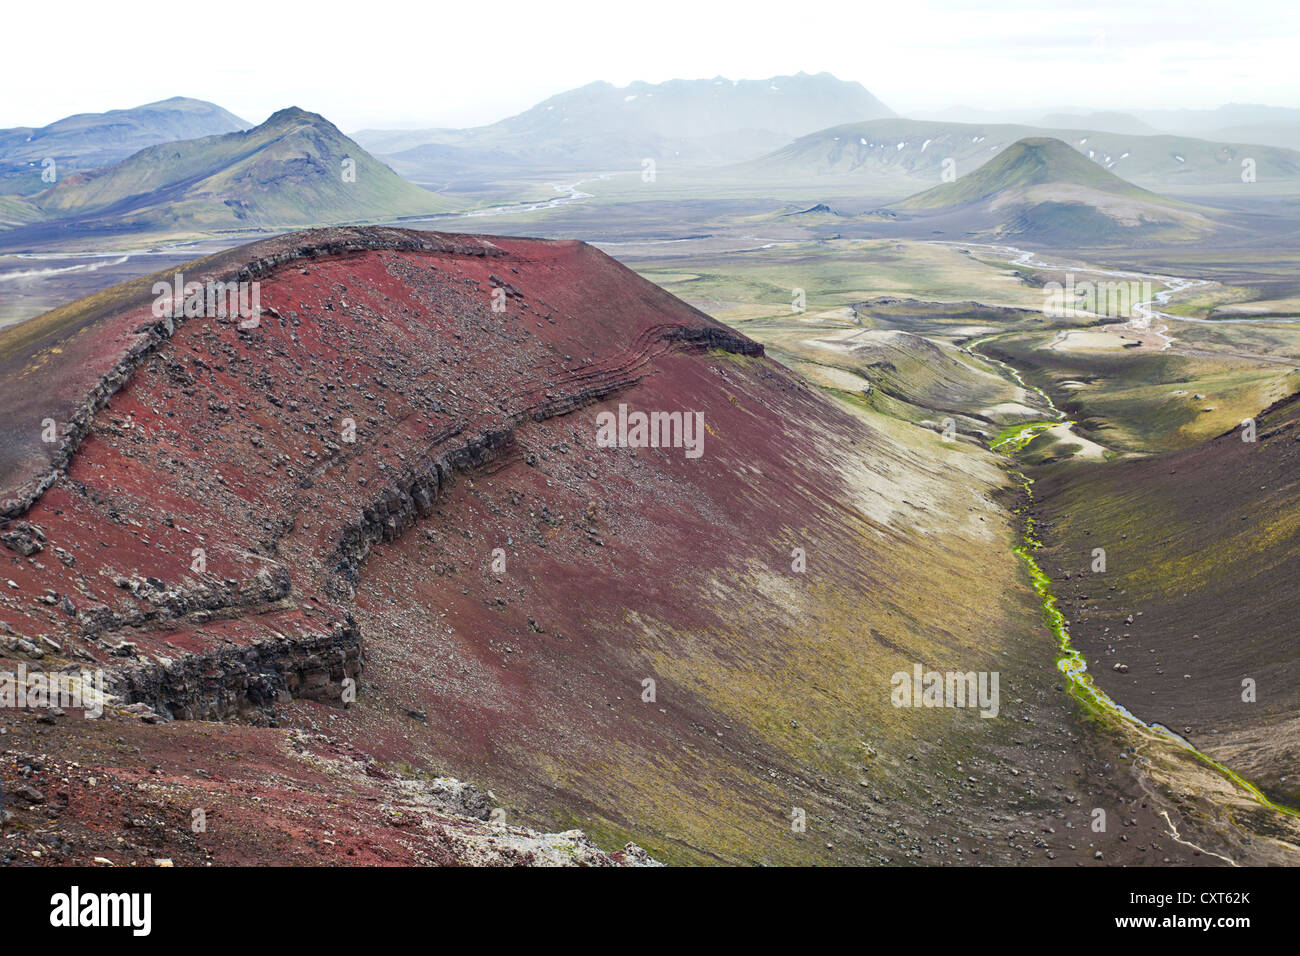 A red mountain, consisting of rhyolite rocks and minerals containing iron, surrounded by green, moss-covered mountains Stock Photo